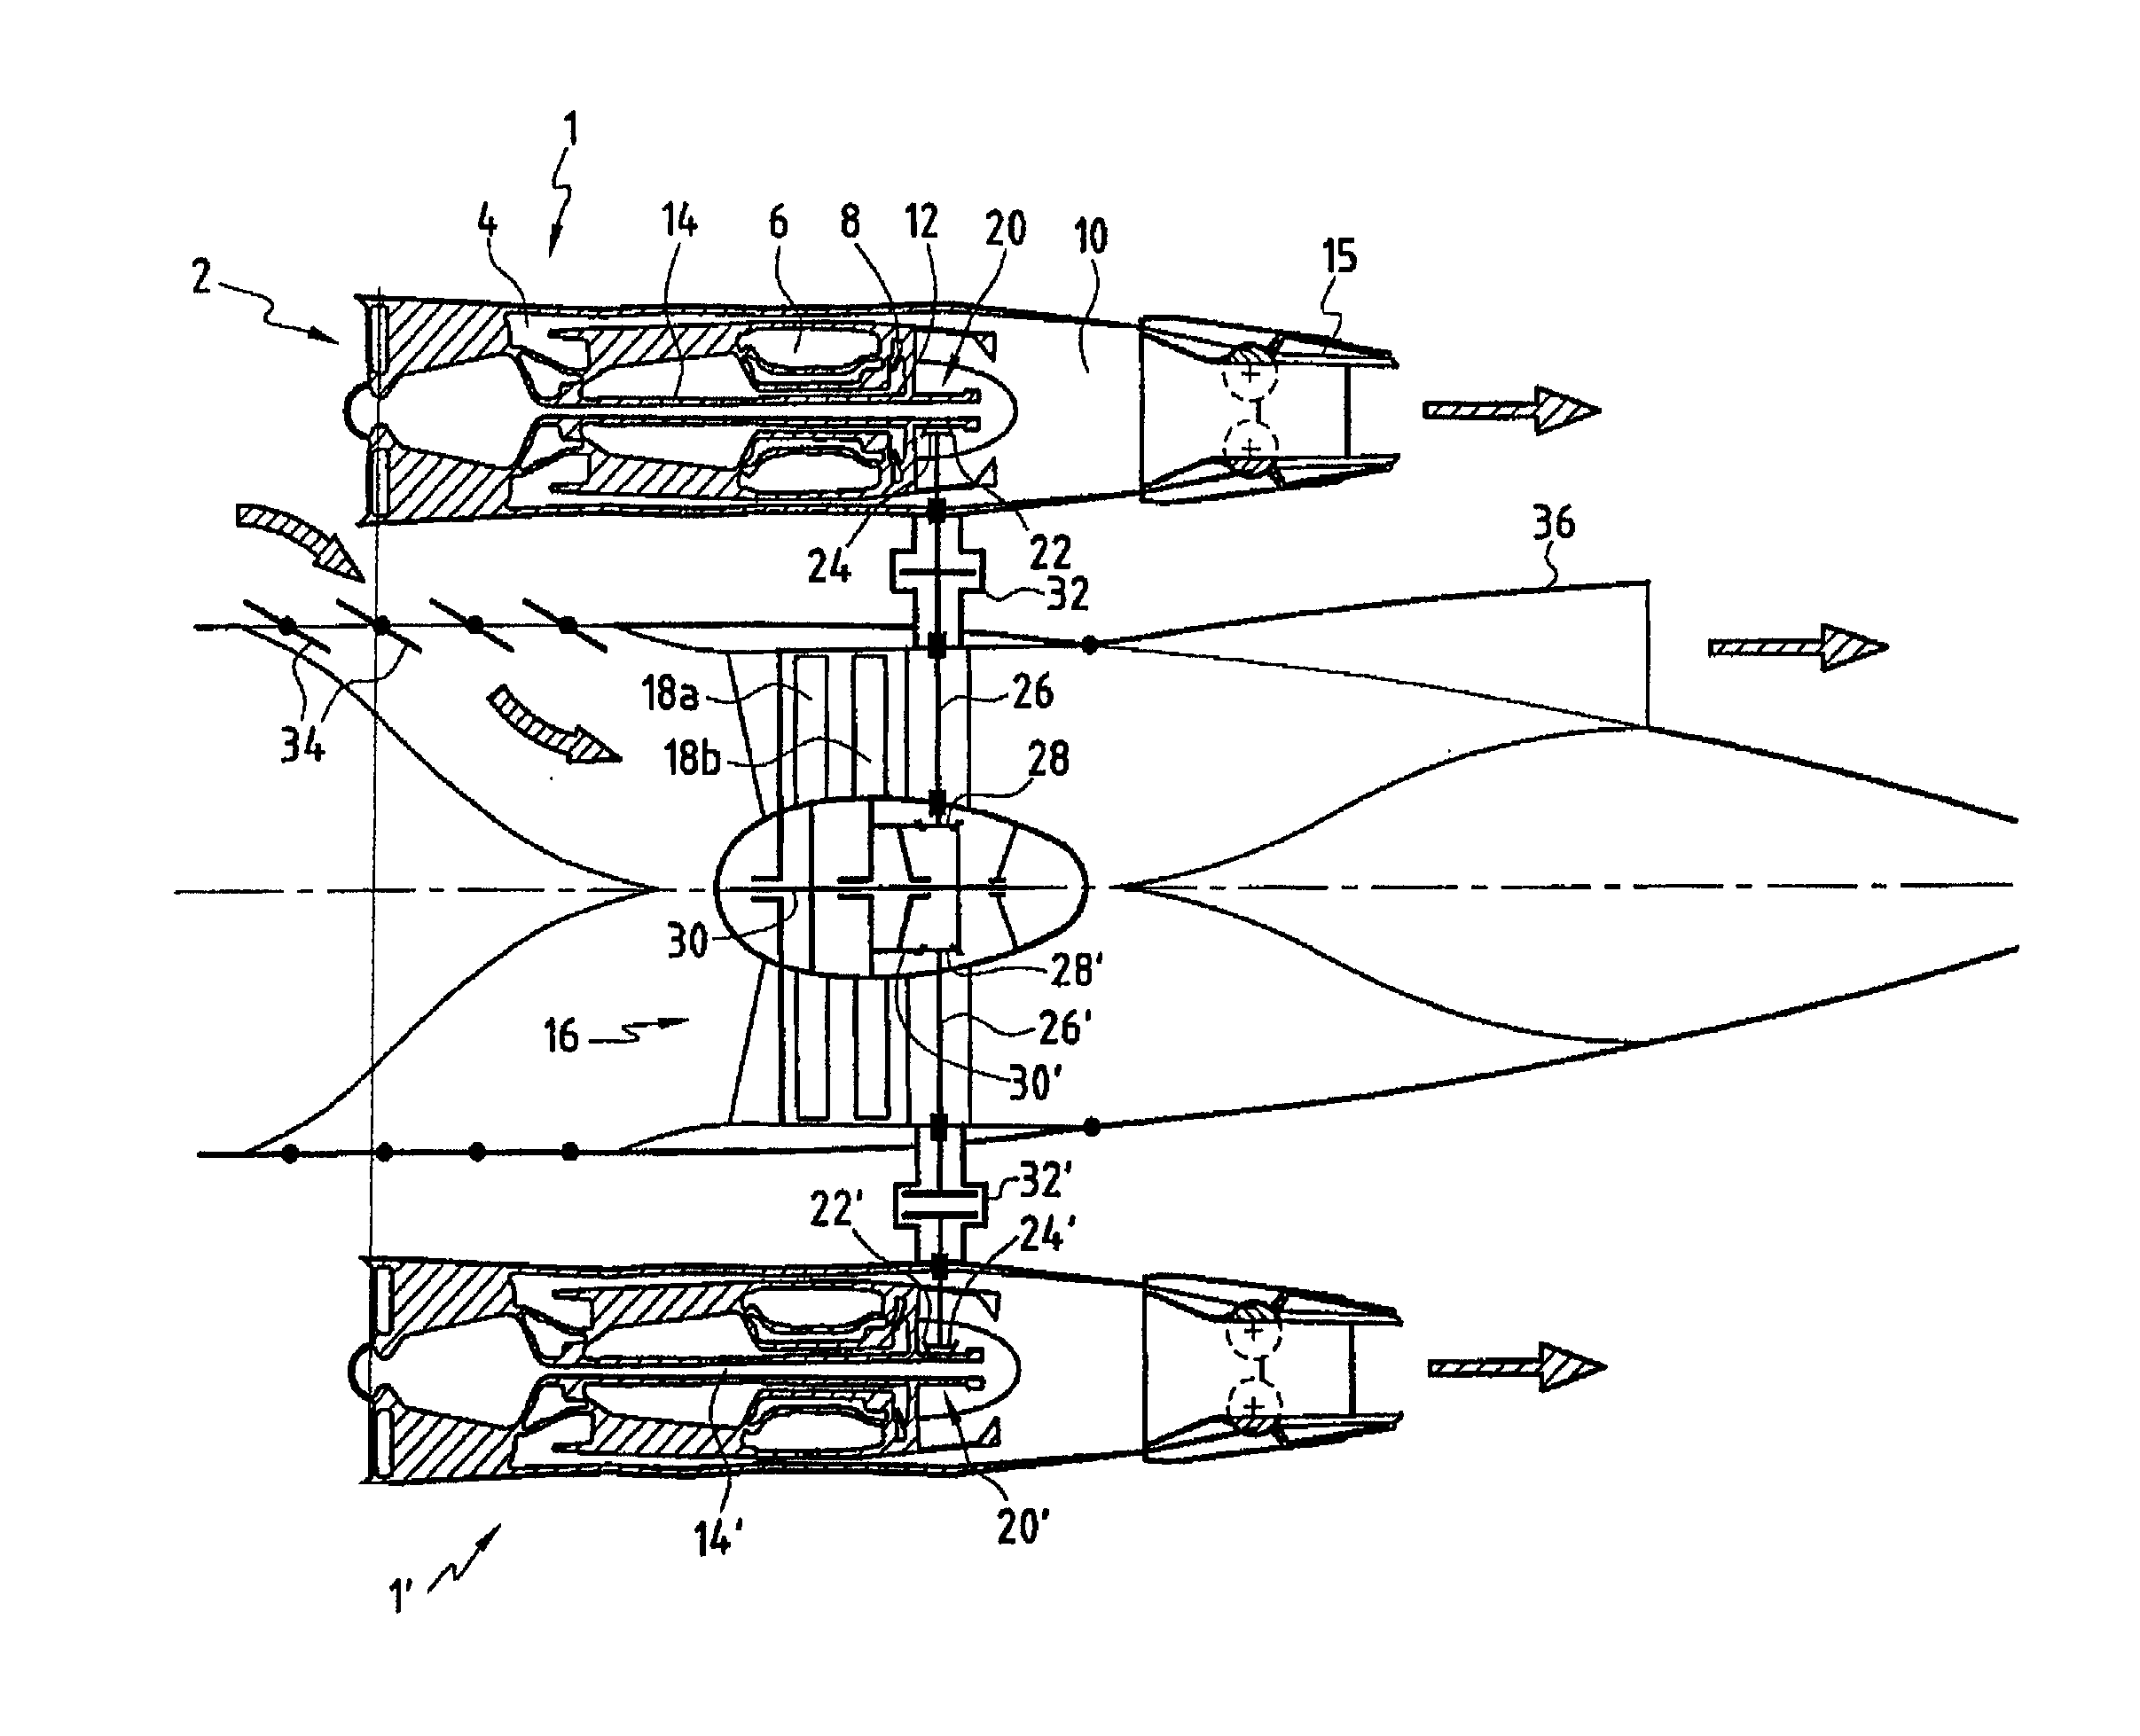 Variable cycle propulsion system with mechanical transmission for a supersonic airplane